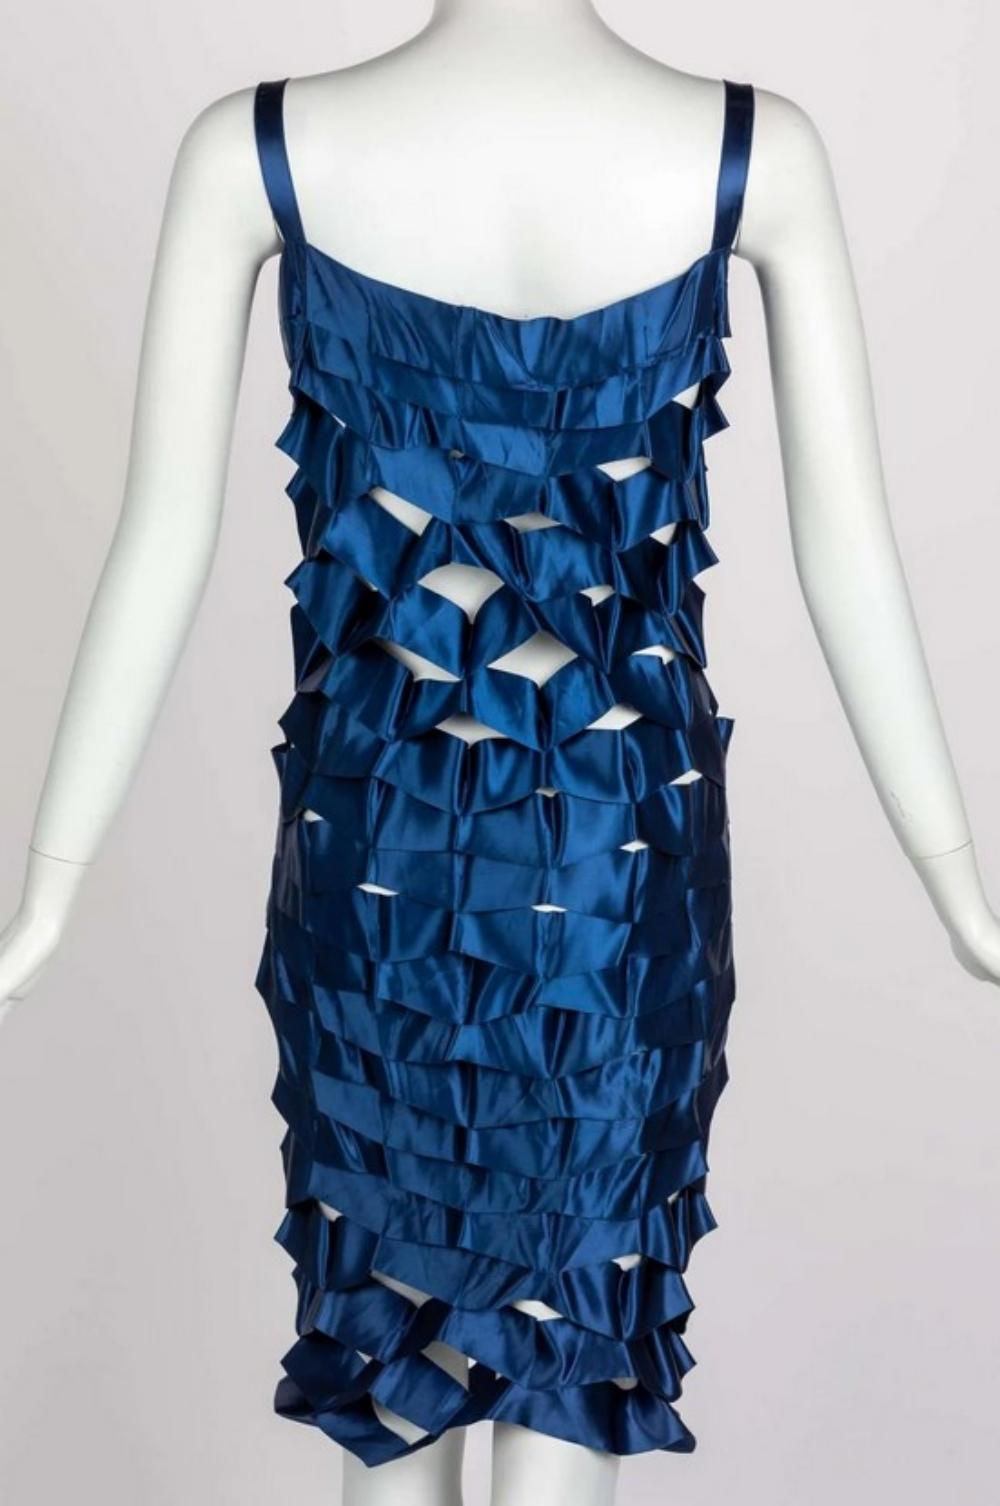 Women's Issey Miyake Sapphire Japanese Blue Satin Ribbon Cage Dress, 1990s For Sale